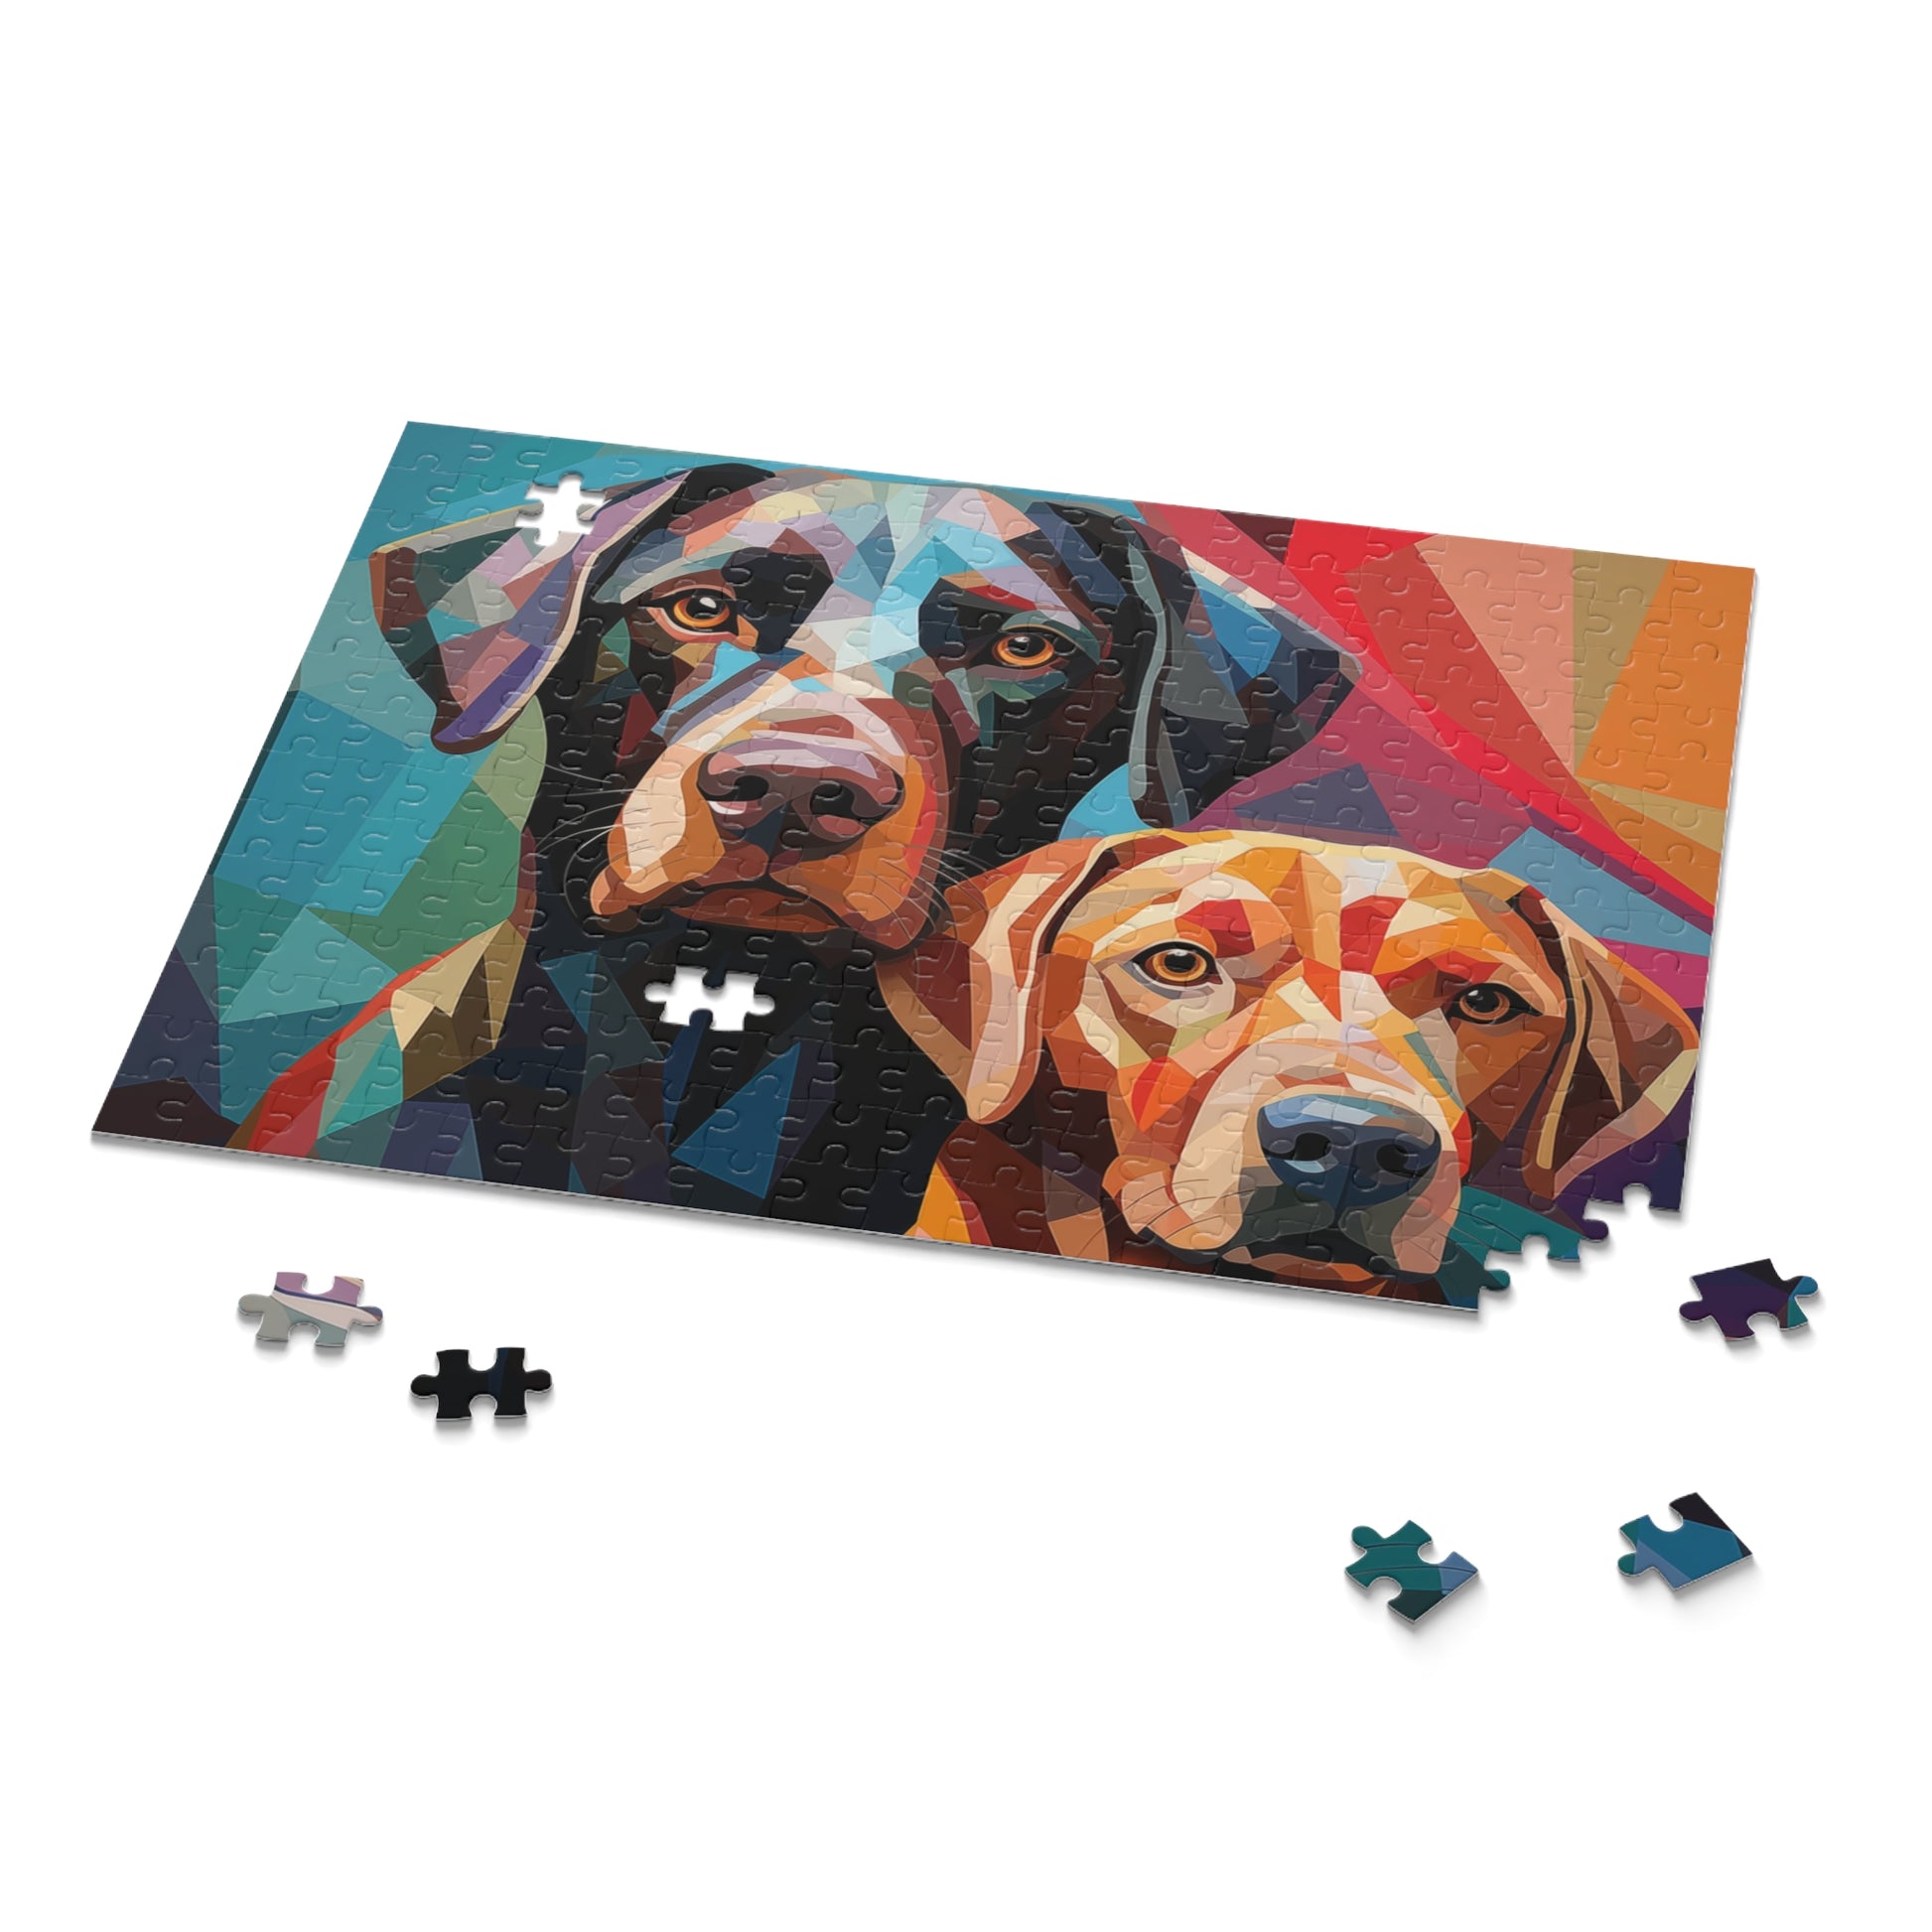 Labrador Abstract Dog Vibrant Jigsaw Puzzle Adult Birthday Business Jigsaw Puzzle Gift for Him Funny Humorous Indoor Outdoor Game Gift For Her Online-9